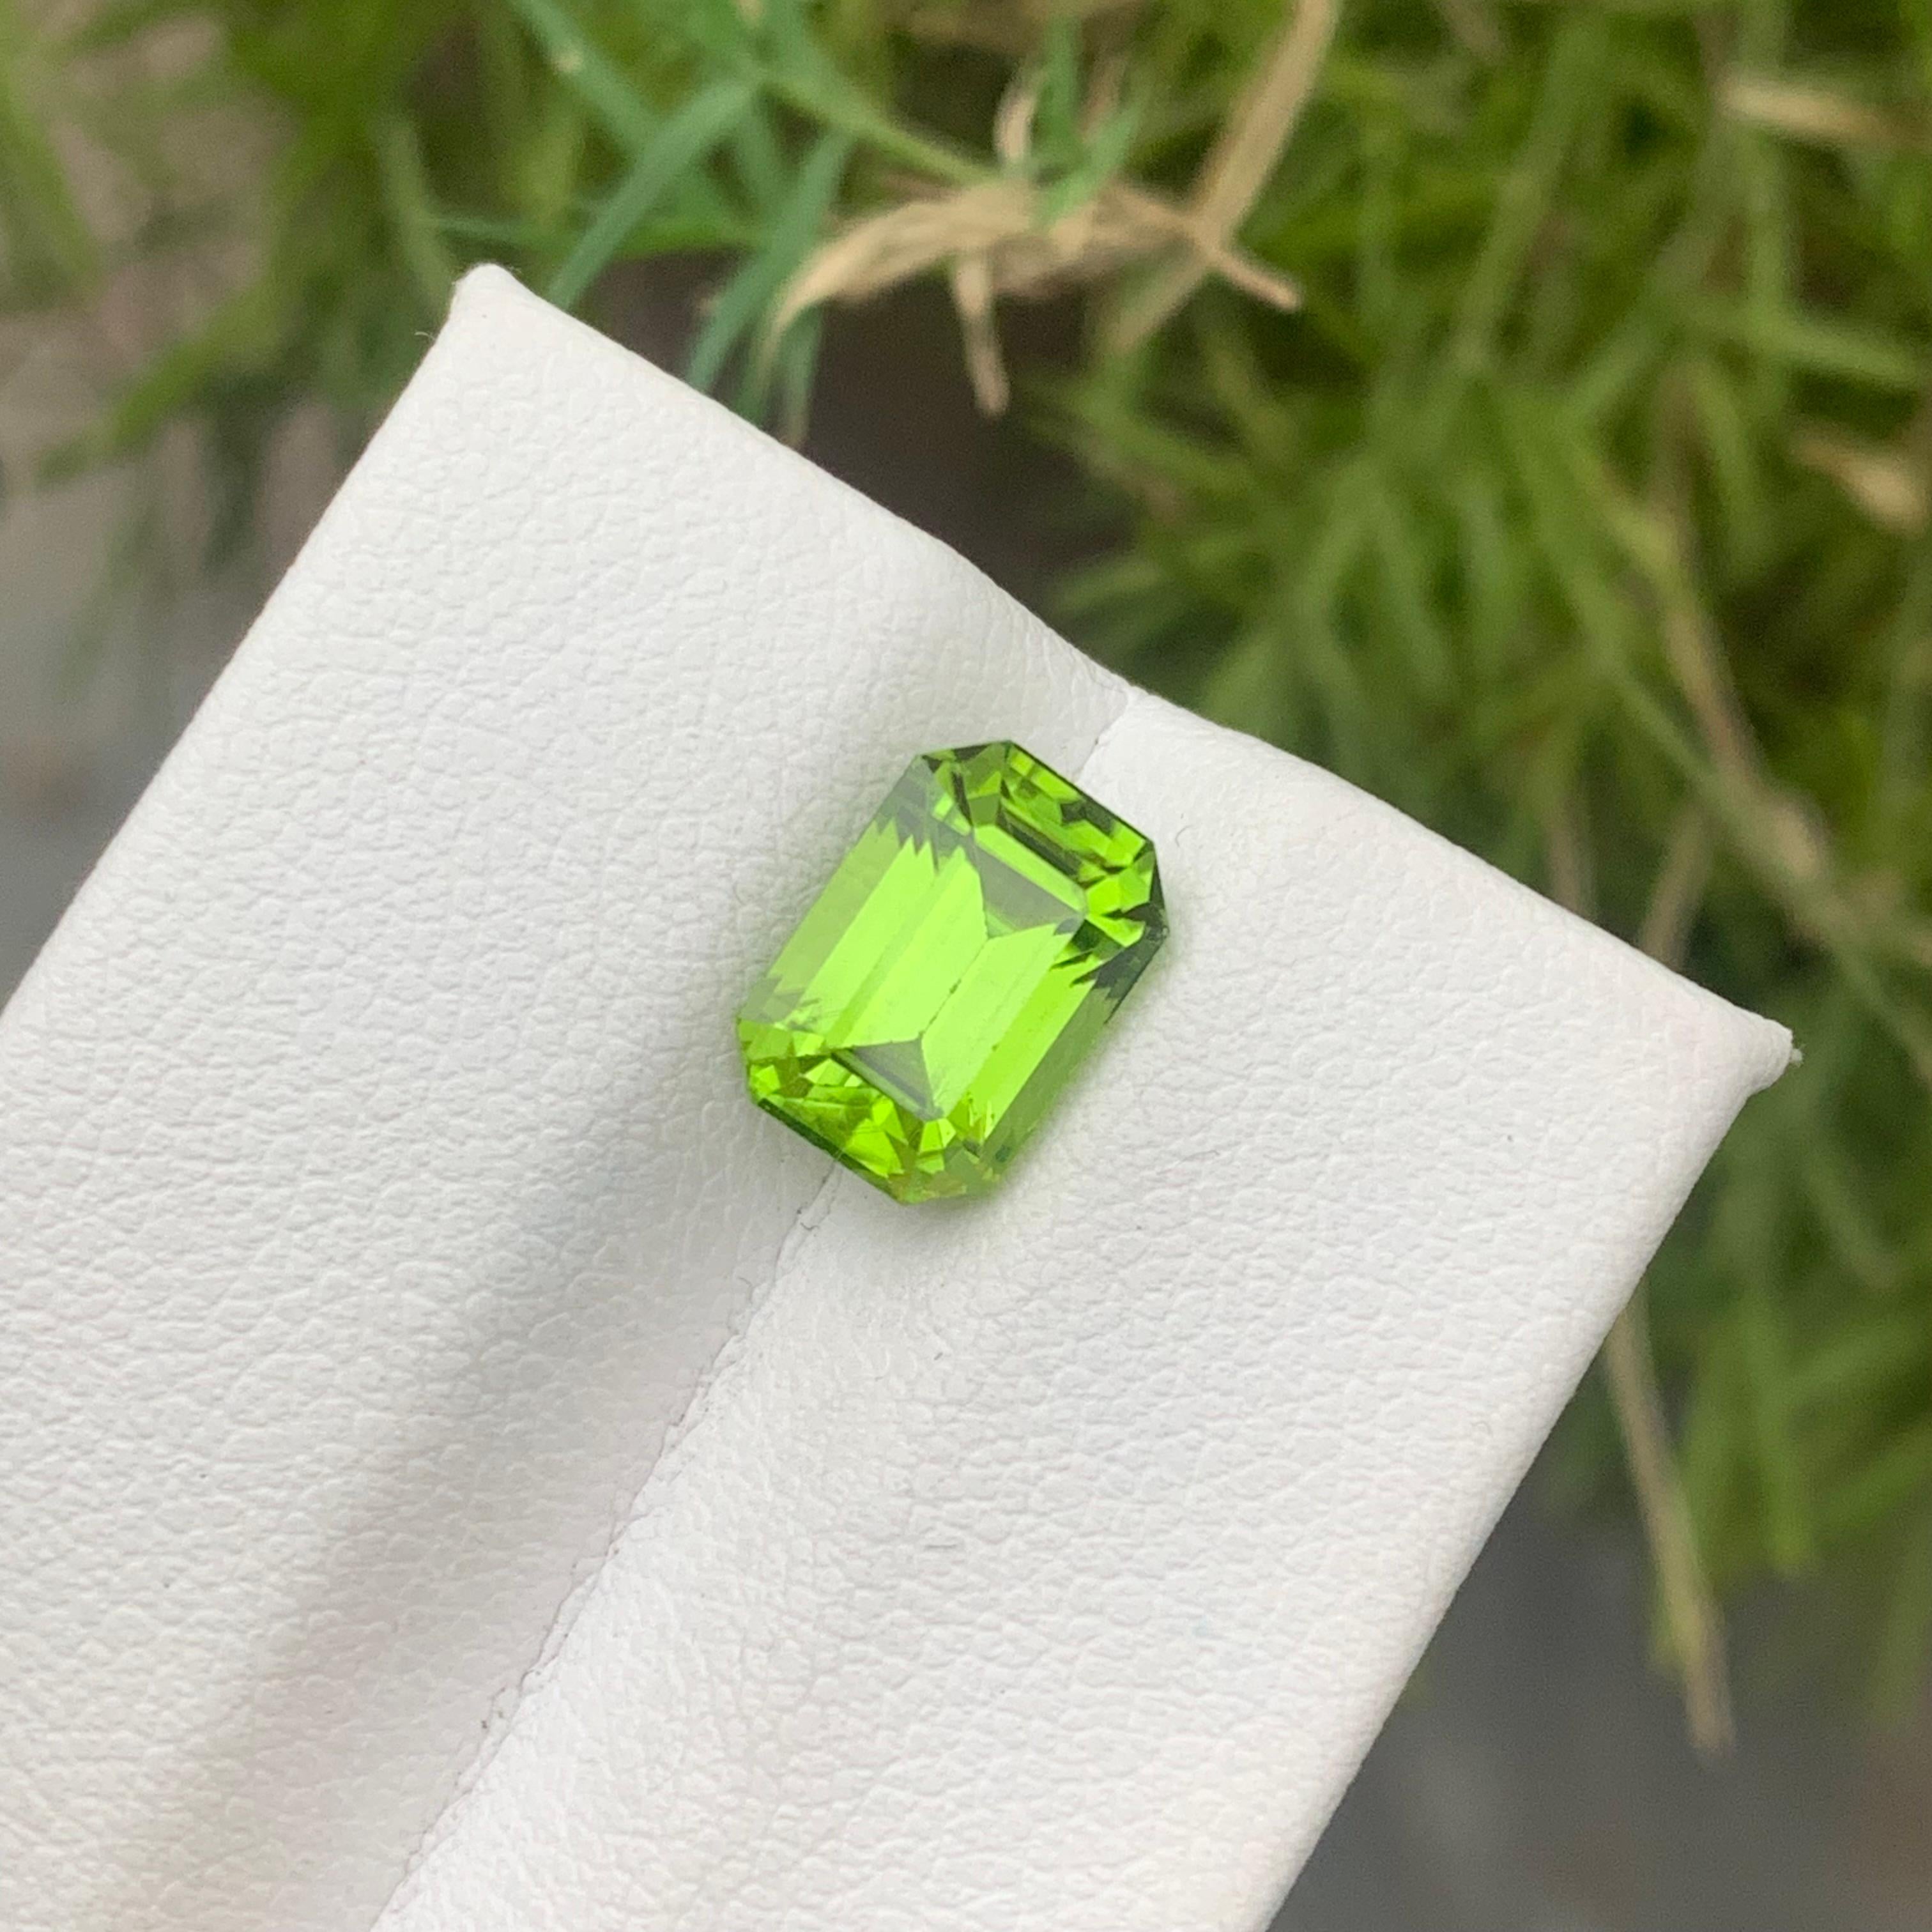 Gorgeous 3.35 Carat Natural Loose Green Peridot Gemstone from Pakistani Mine For Sale 4